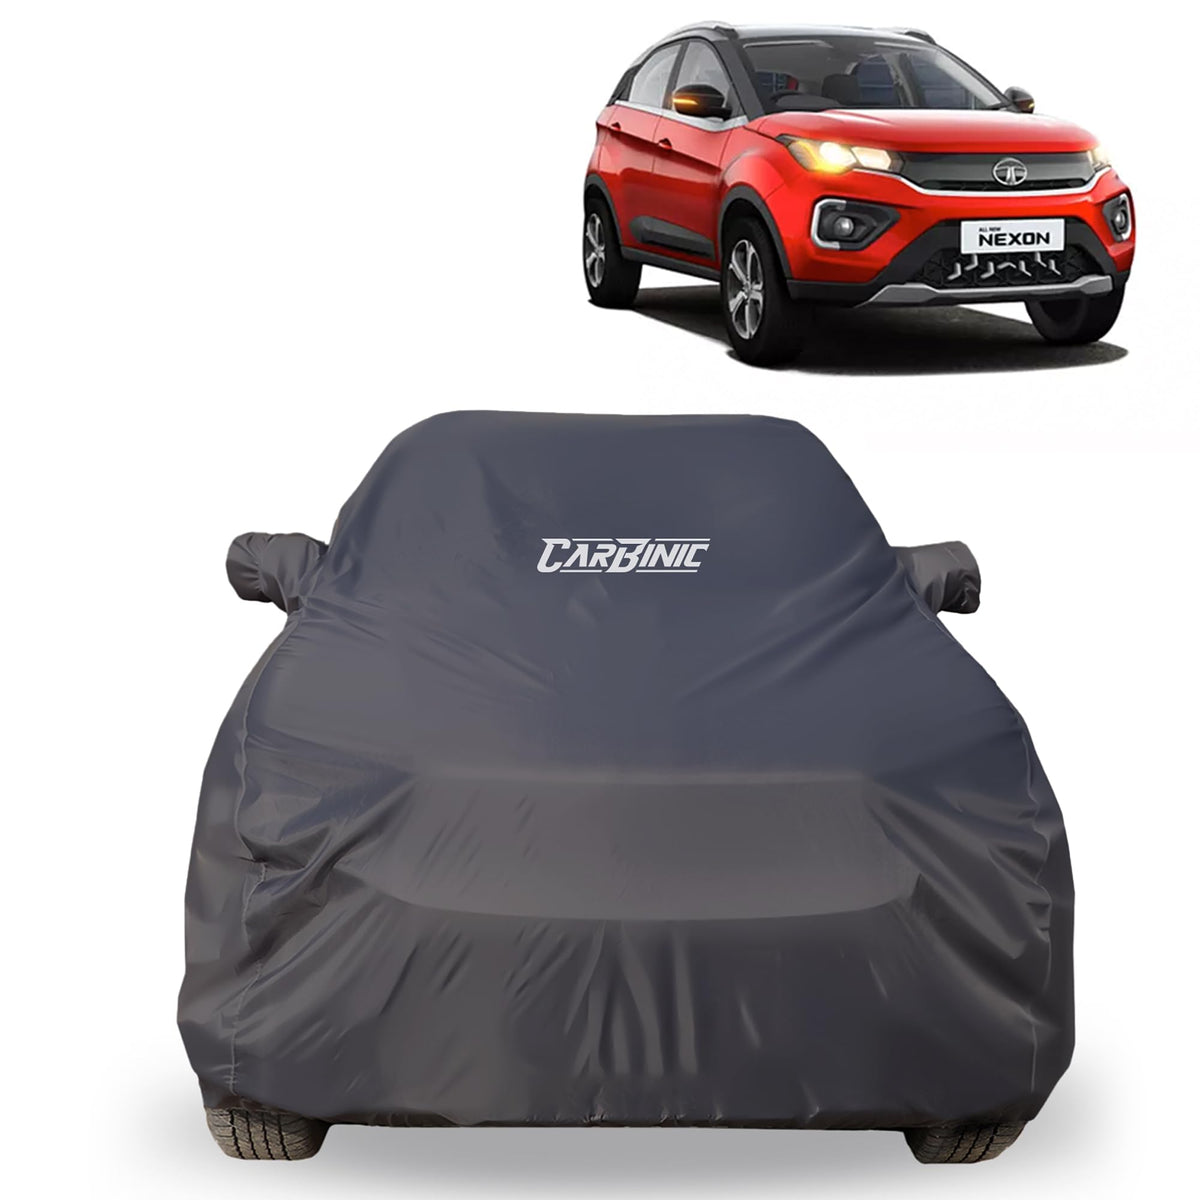 CARBINIC Car Body Cover for Tata Nexon 2020 | Water Resistant, UV Protection Car Cover | Scratchproof Body Shield | All-Weather Cover | Mirror Pocket & Antenna | Car Accessories Dusk Grey